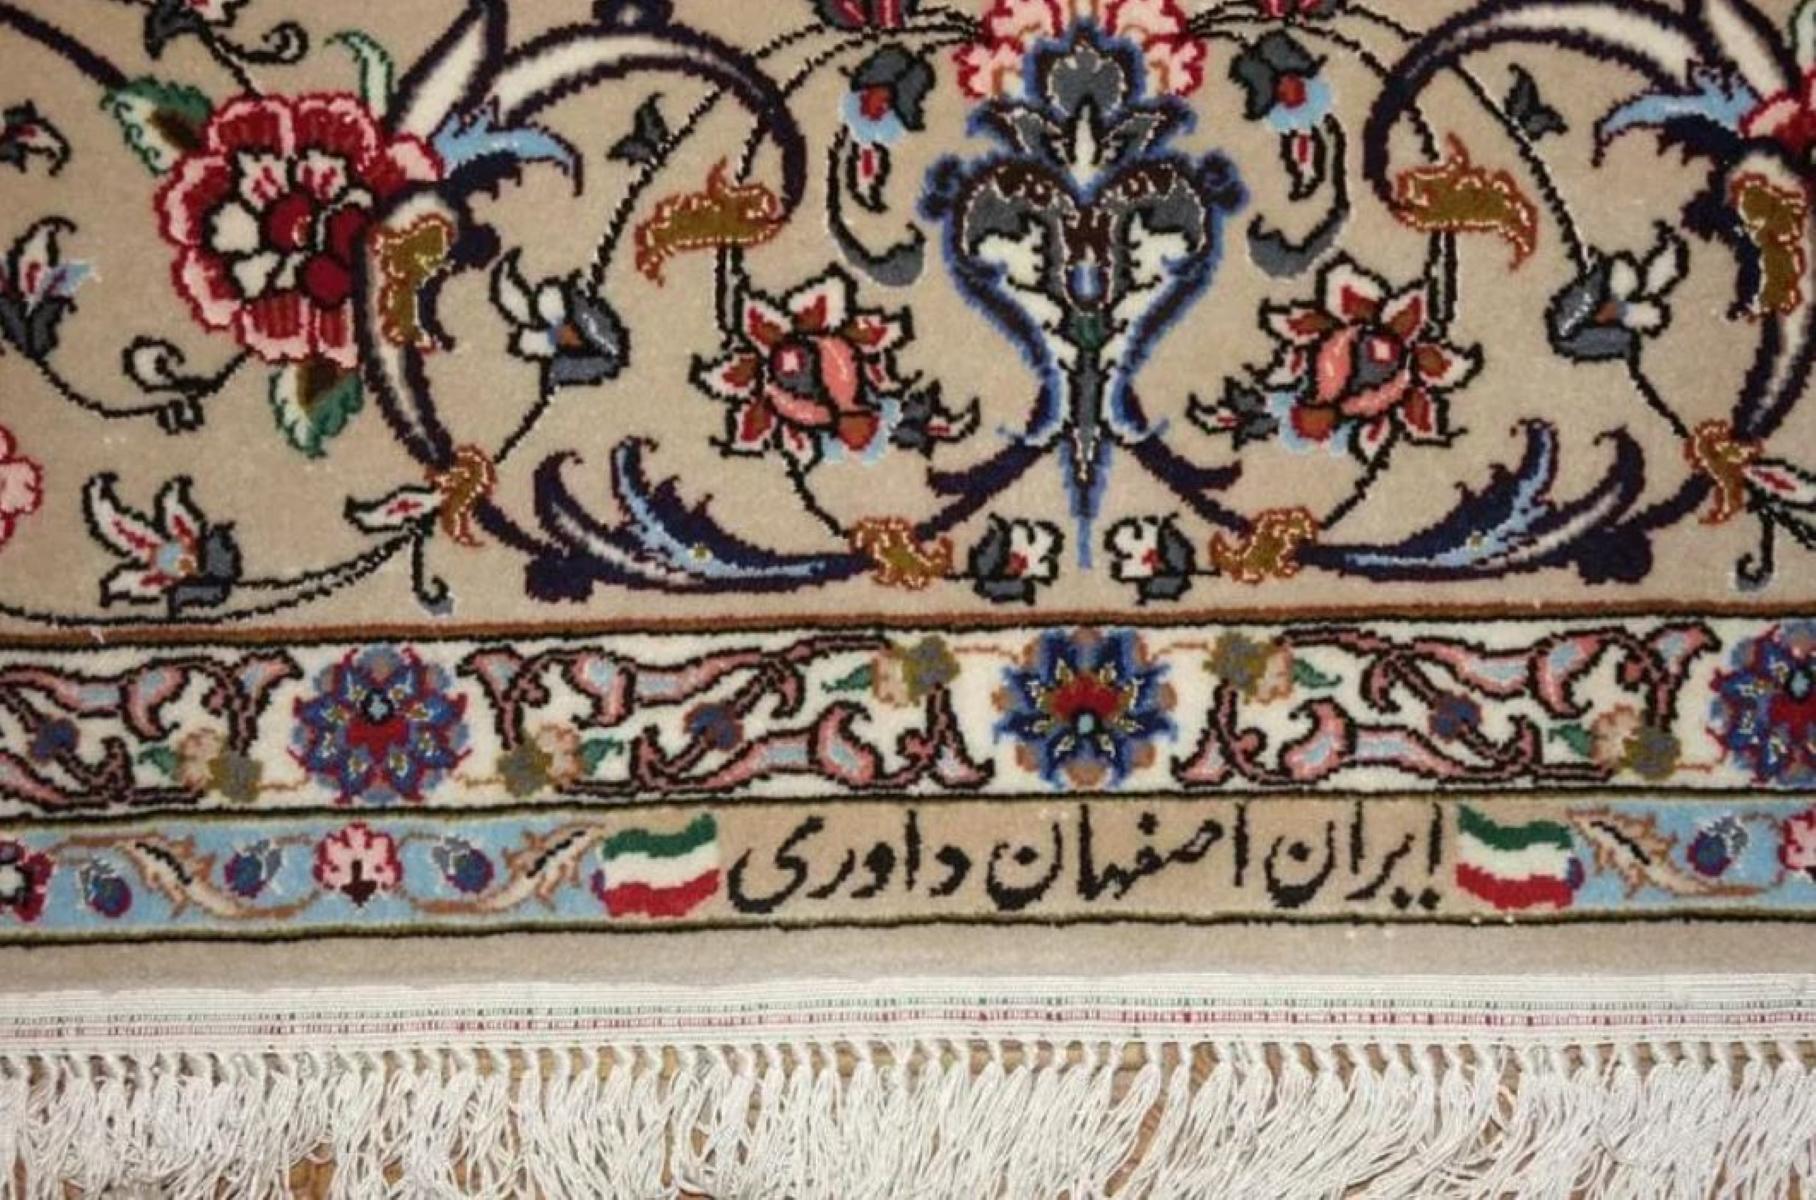 Very fine Persian Isfahan Silk & Wool Rug - 7.6' x 5' In Excellent Condition For Sale In Newmanstown, PA